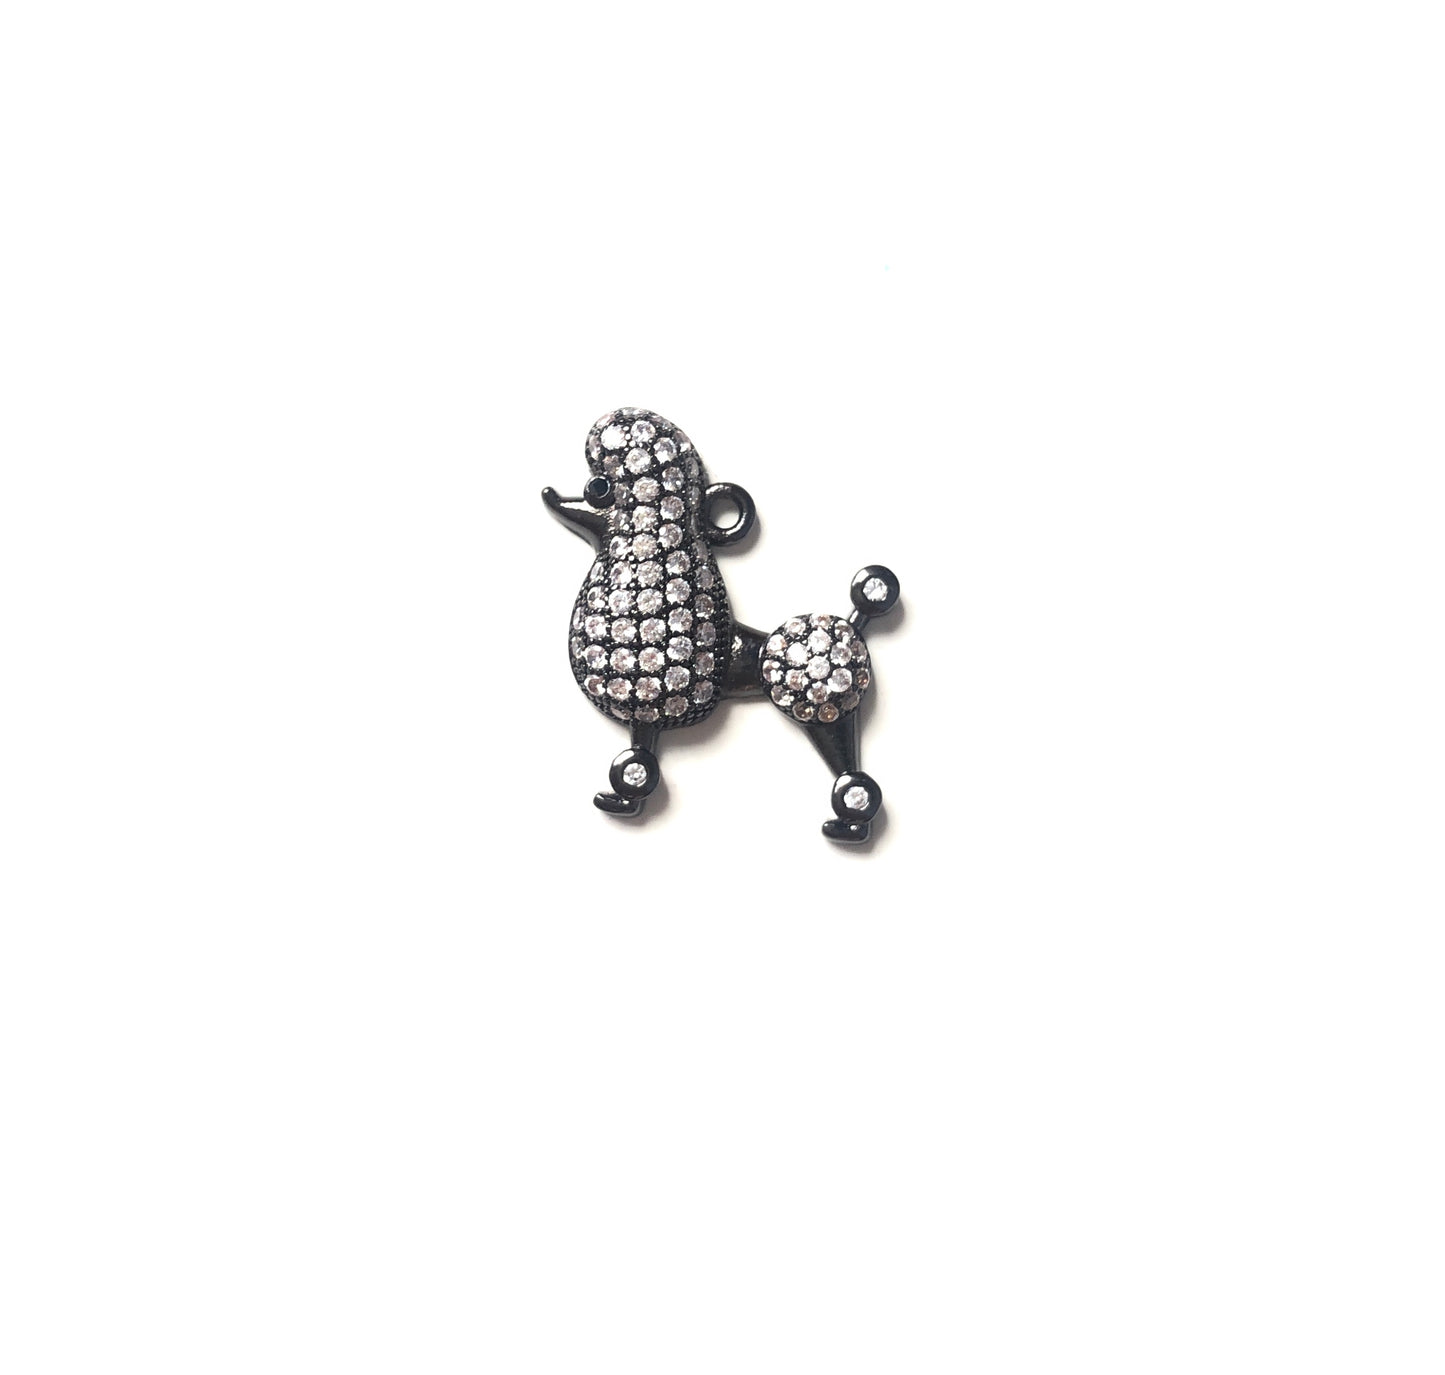 10pcs/lot 19*19mm CZ Paved Poodle Charms Black CZ Paved Charms Animals & Insects Charms Beads Beyond